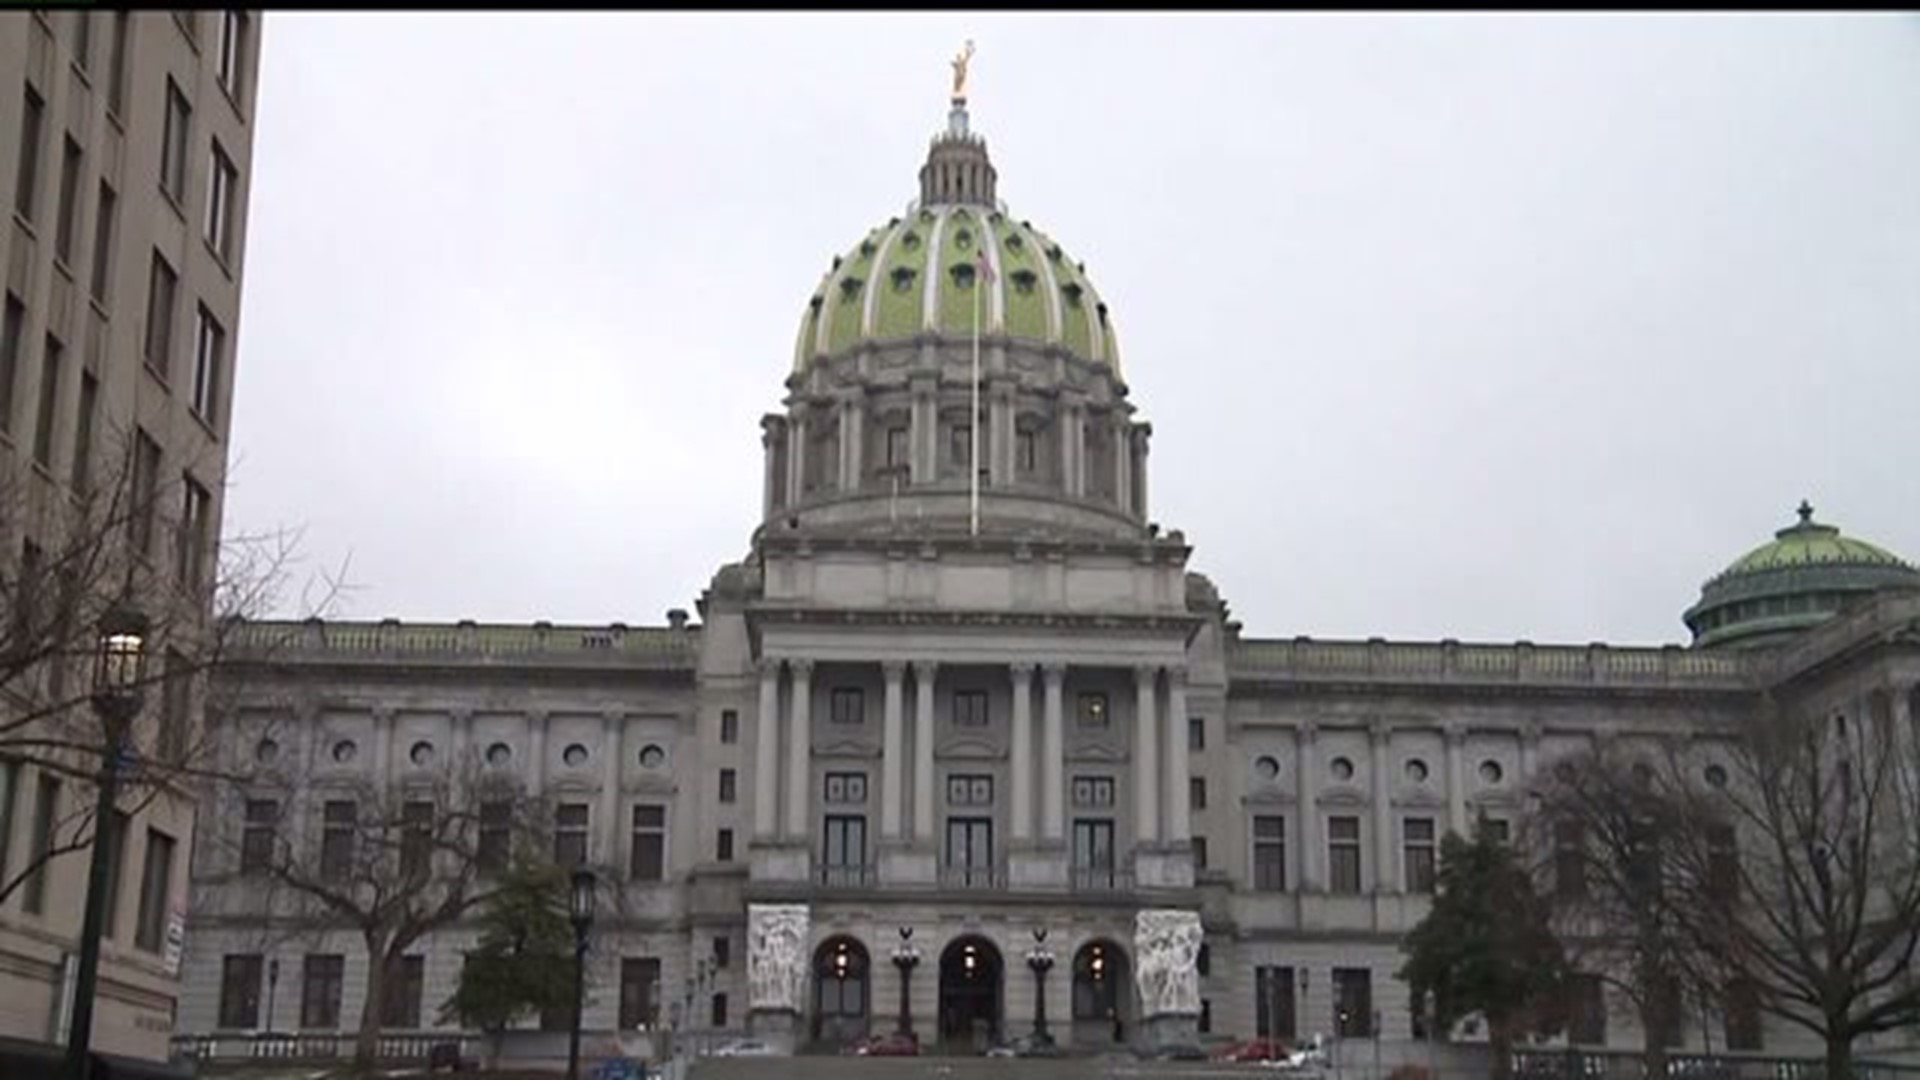 Senate makes "minor changes" to Pa. budget bill, sends back to House